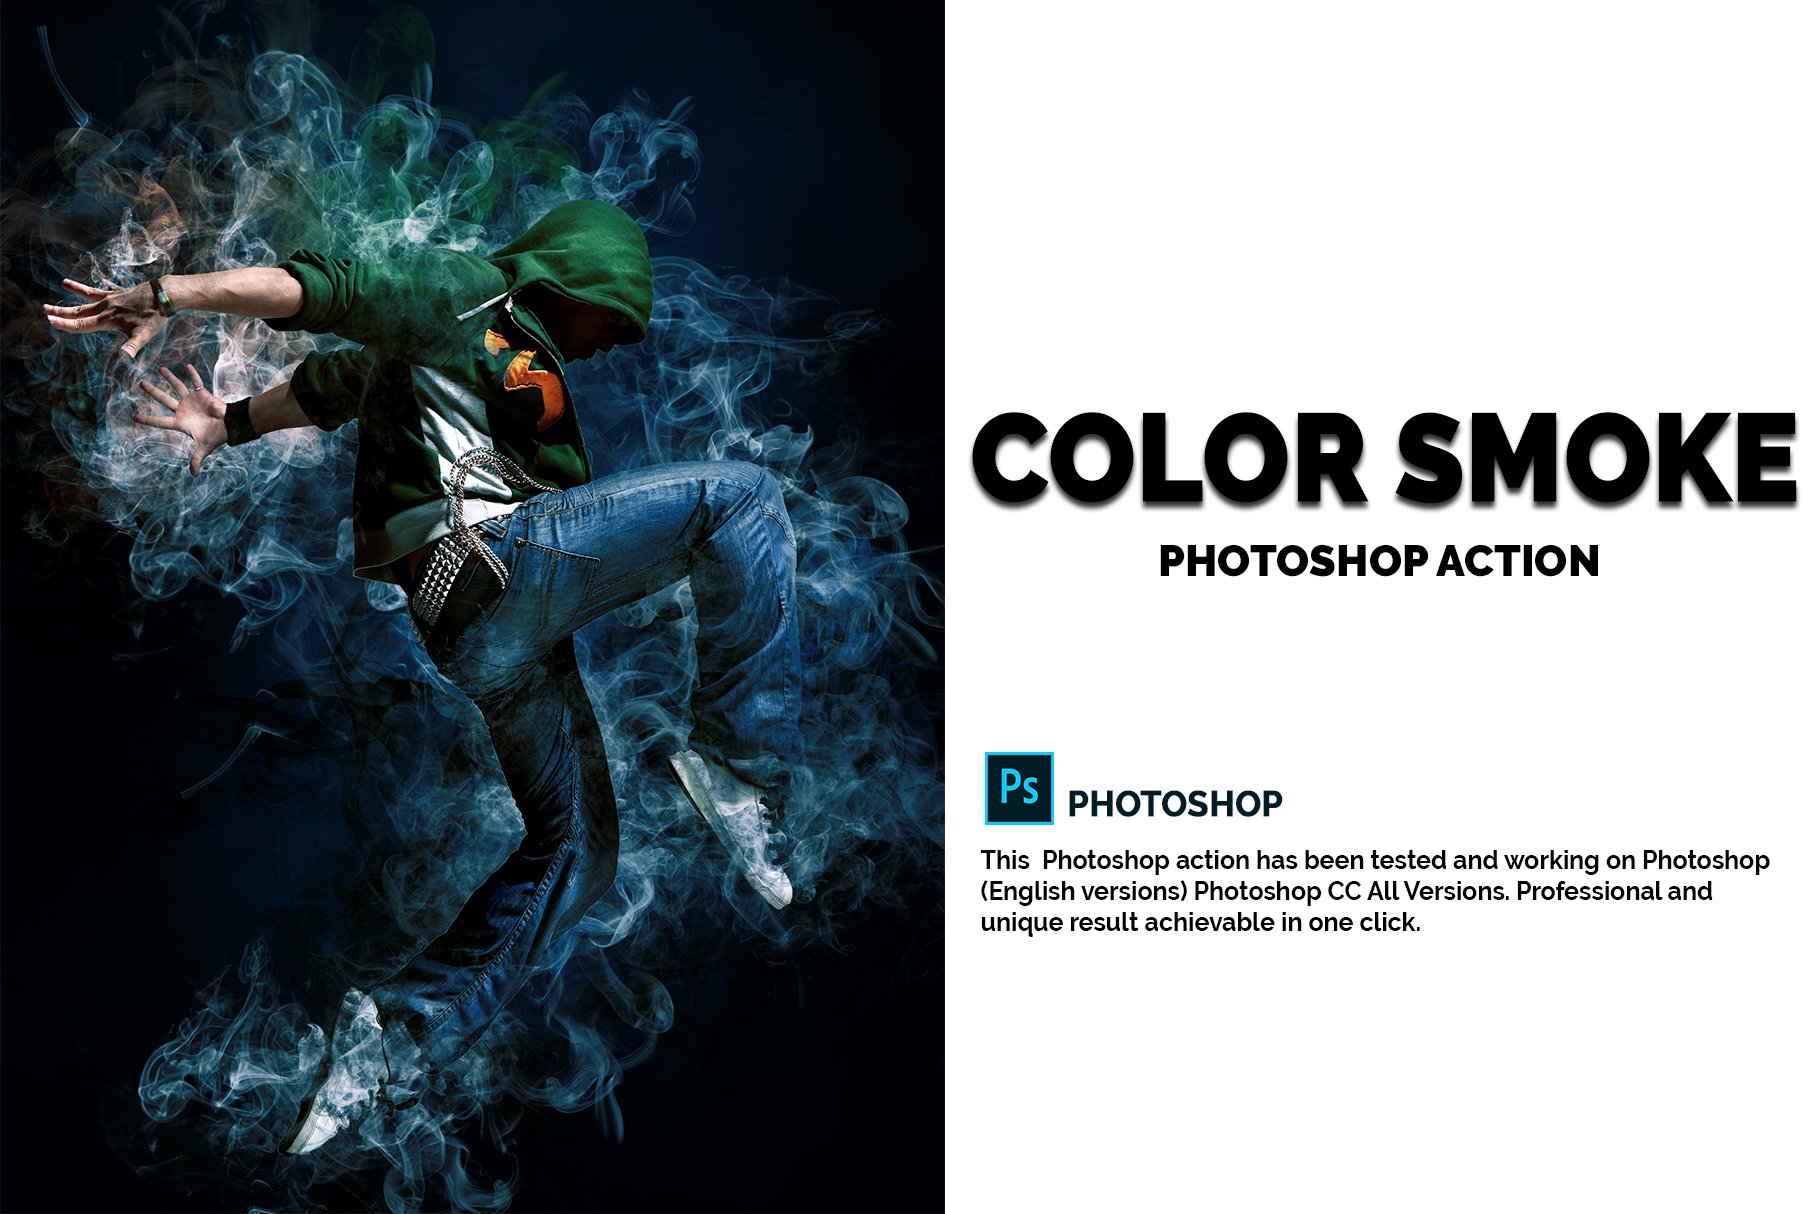 Color Smoke Photoshop Actioncover image.